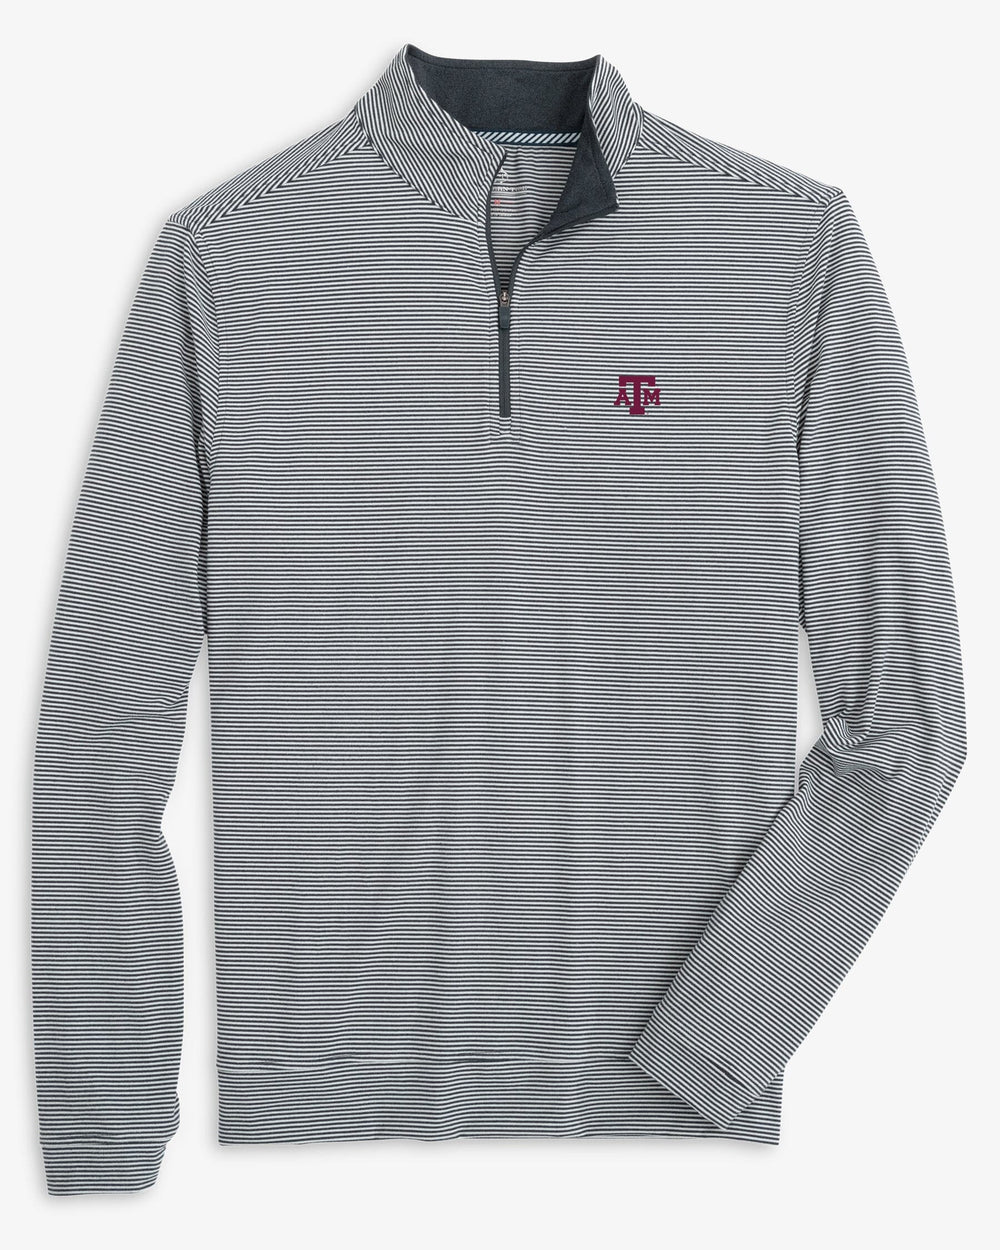 The front view of the Texas A&M Aggies Cruiser Micro-Stripe Heather Quarter Zip by Southern Tide - Heather Black